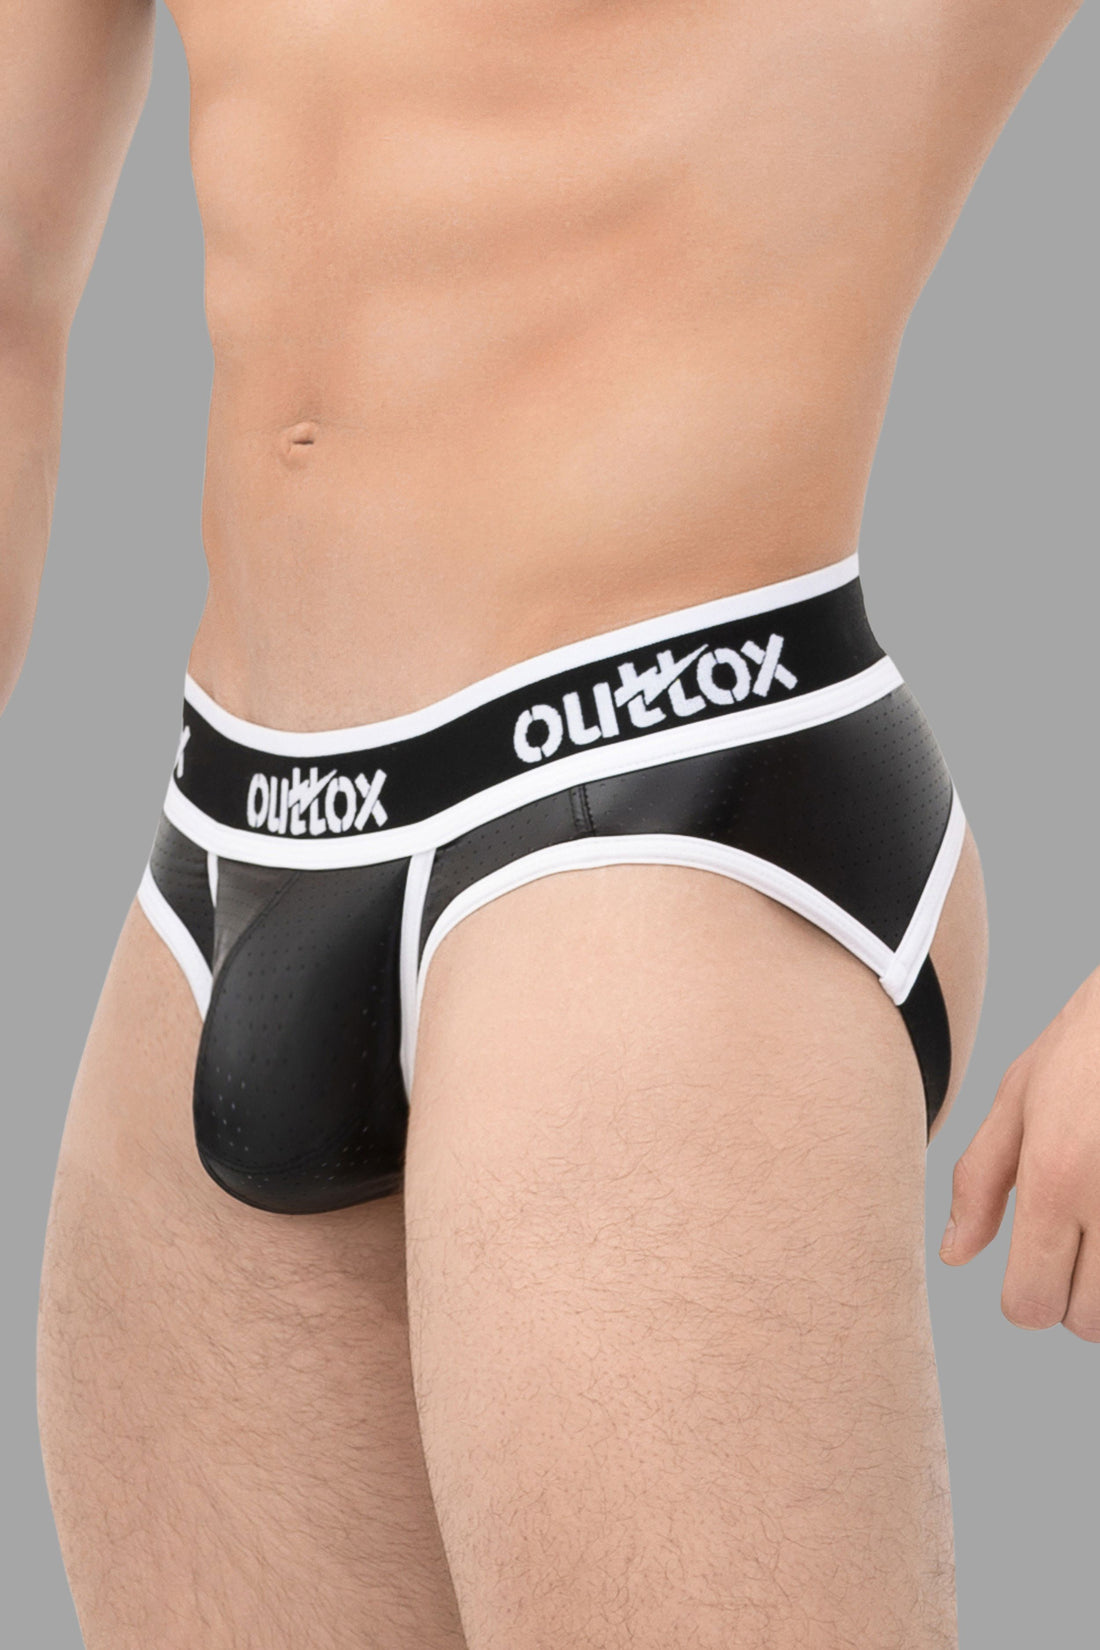 Outtox. Open Rear Briefs with Snap Codpiece. Black+White